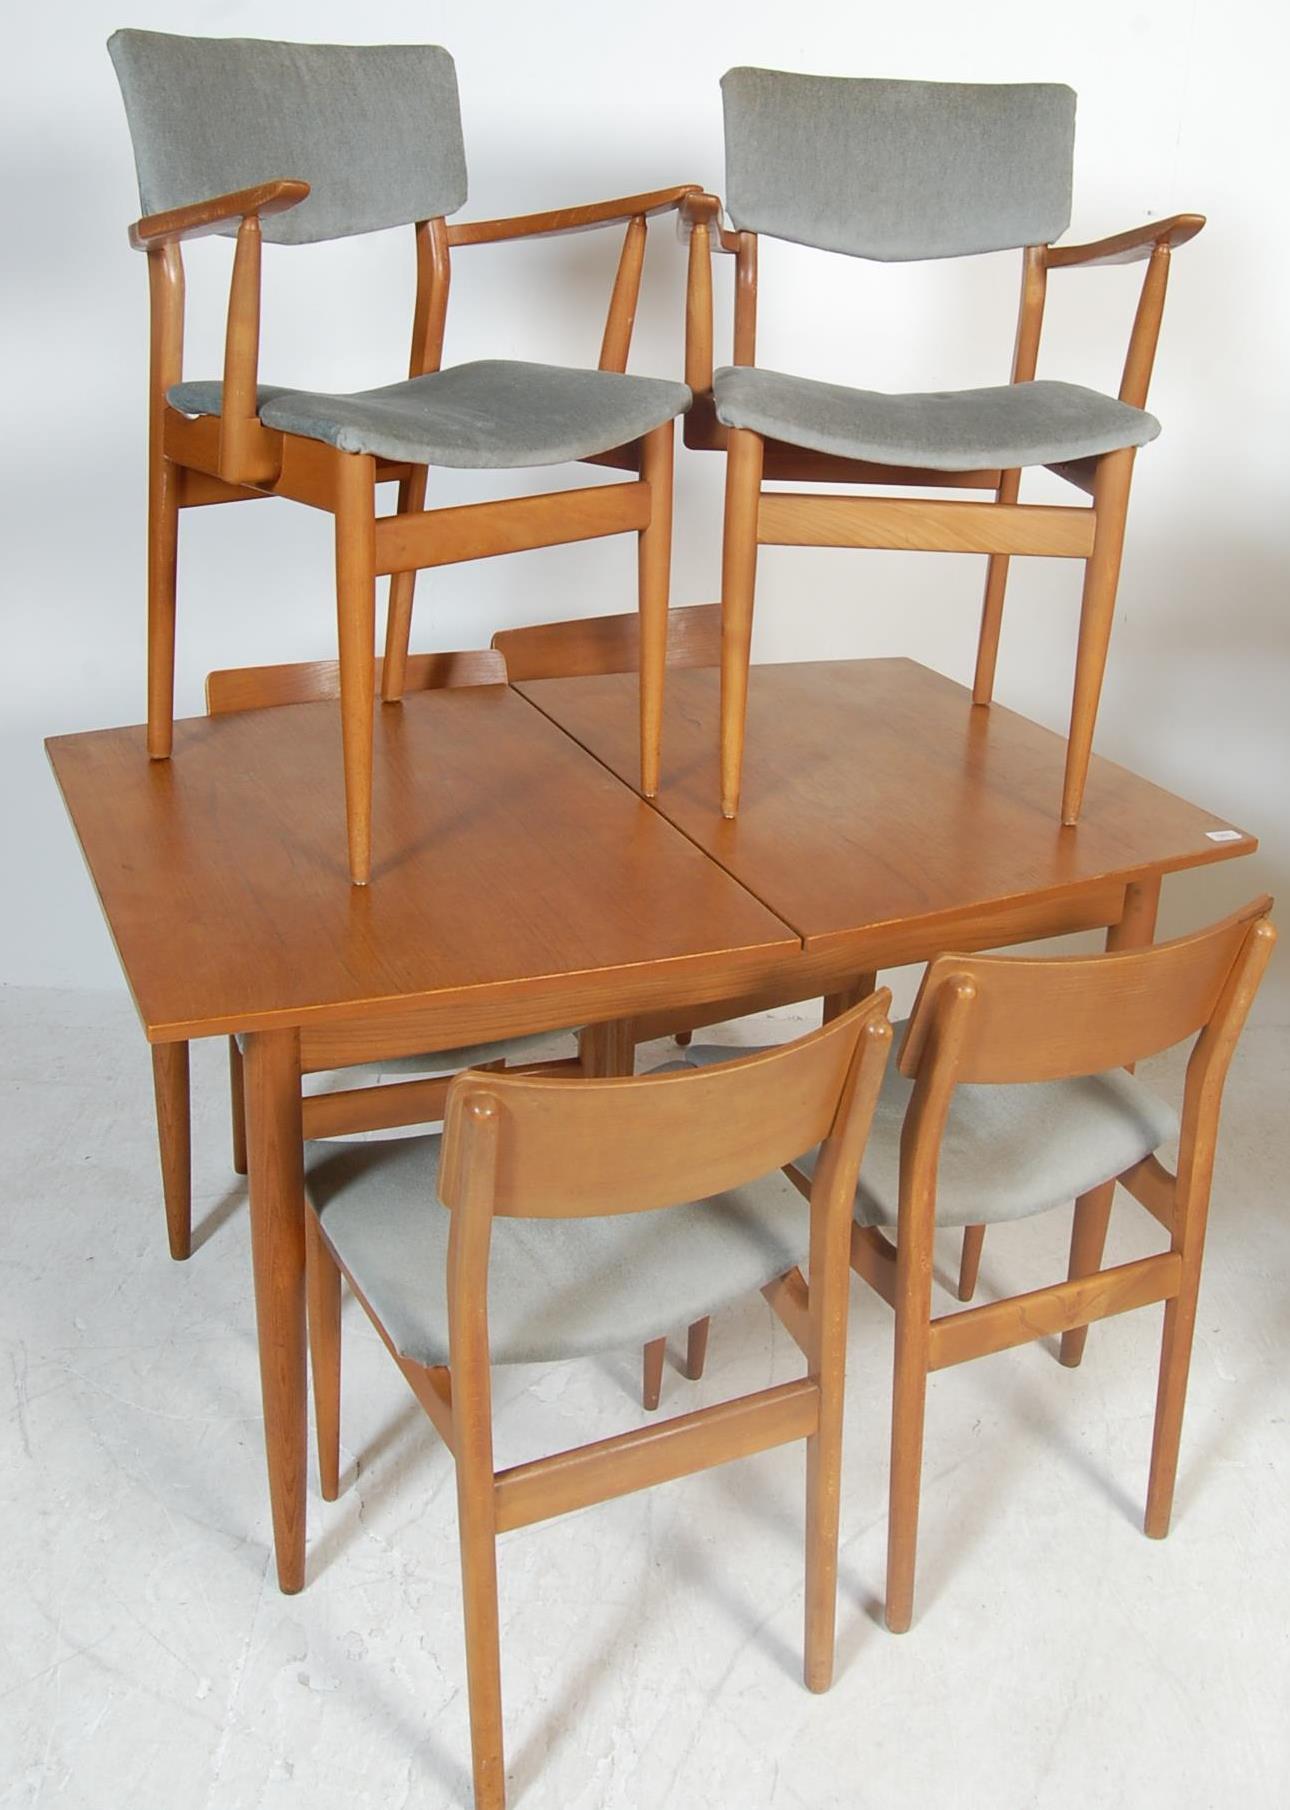 VINTAGE RETRO 1960’S TEAK WOOD SCANDART EXTENDING DINING TABLE AND CHAIRS